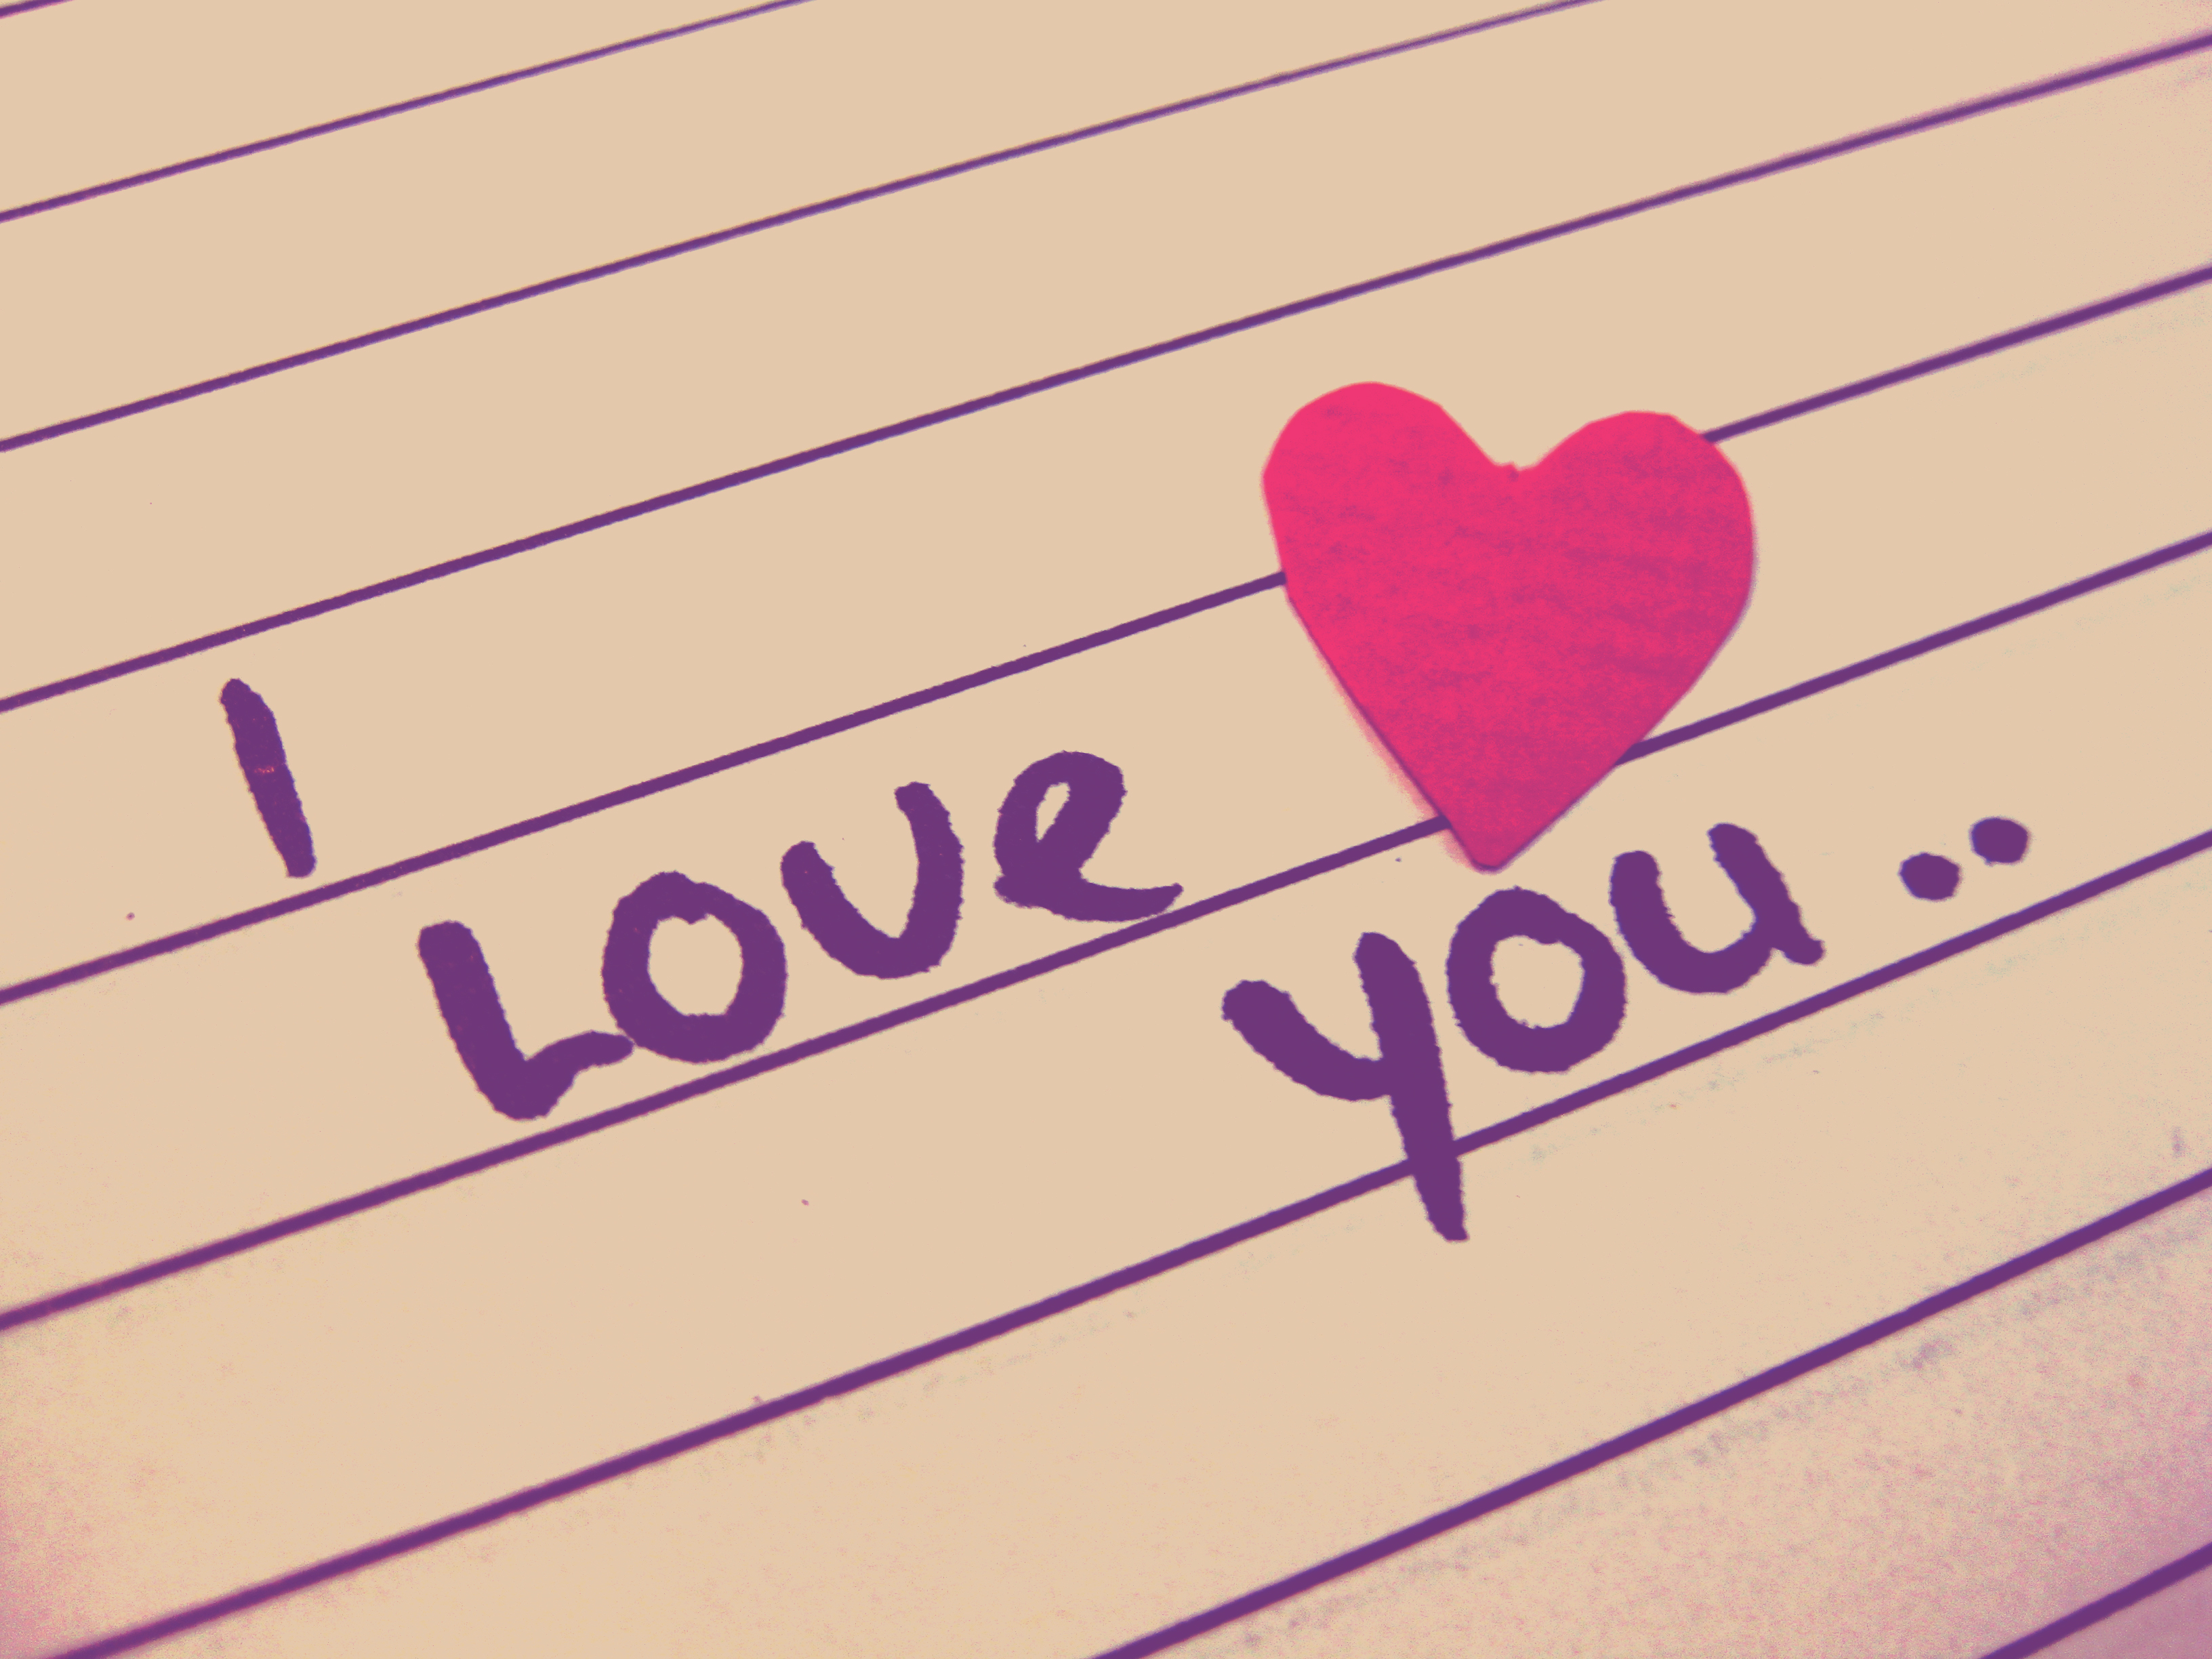 I_love_you_by_Pamba.